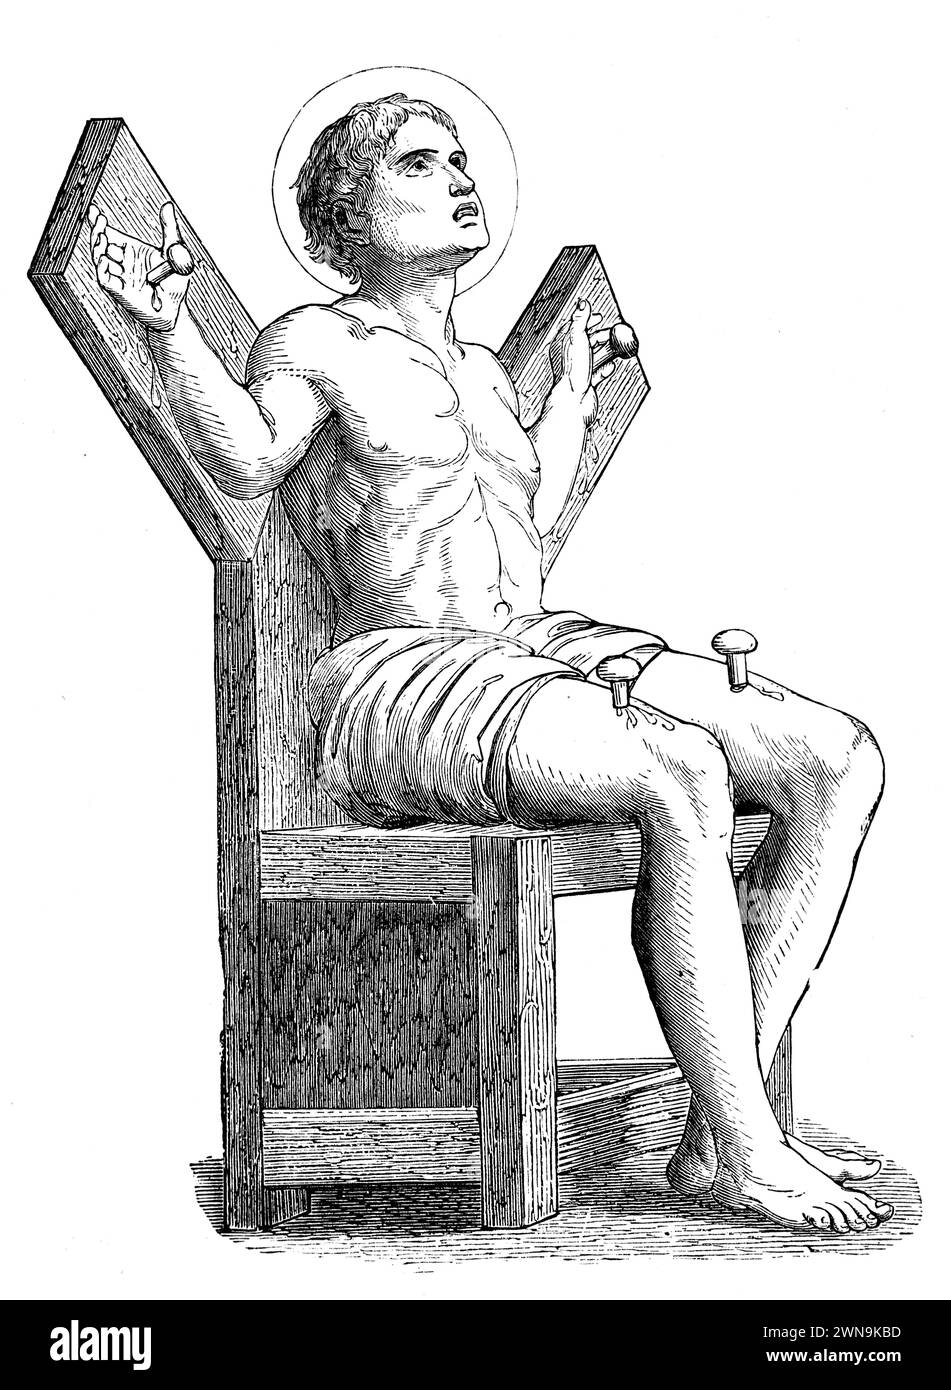 Saint Quentin nailed to a cross on a chair: Quentin of Amiens was a 3rd century Christian saint who was martyred at Beauvais. Engraving from Lives of the Saints by the Reverend Sabin Baring-Gould, published 1898 Stock Photo